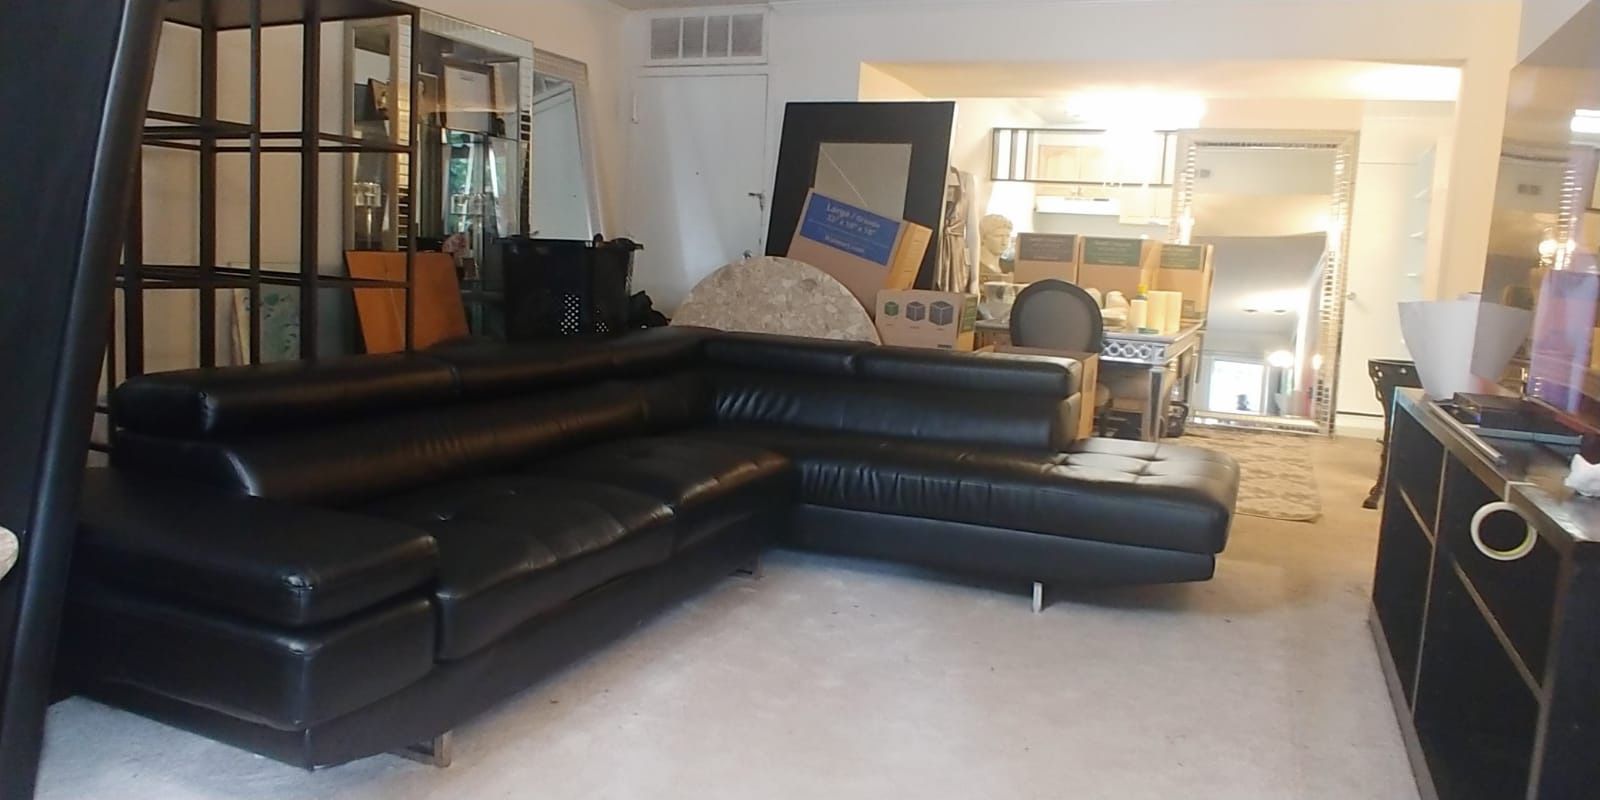 Big Luxury Leather L Shaped Sectional Couch. TODAY ONLY BEFORE 5PM Moving Sale!